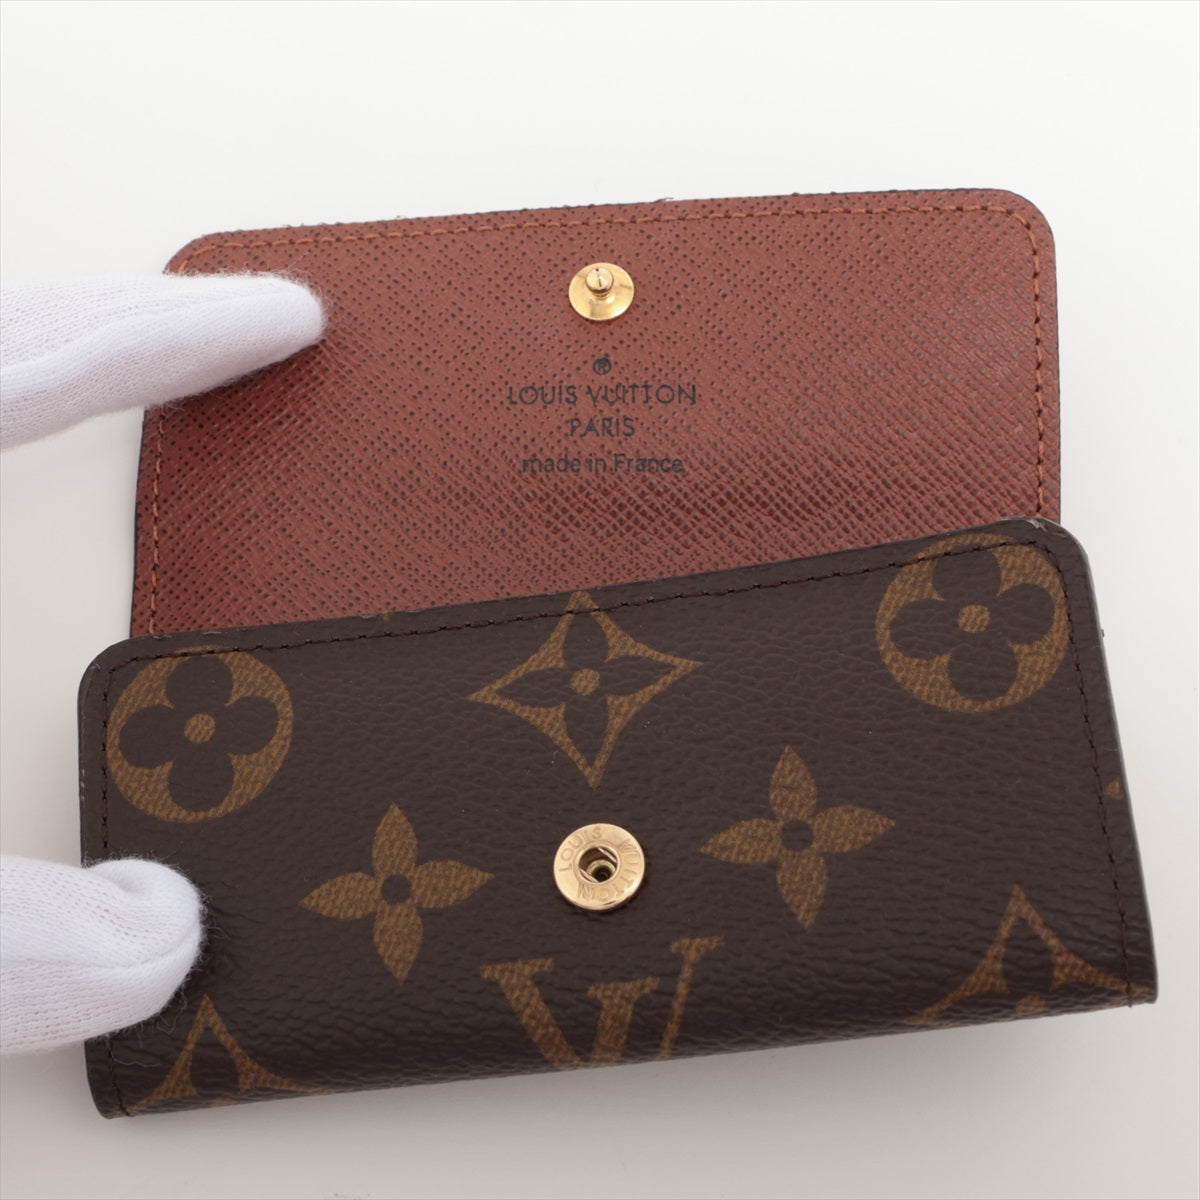 Louis Vuitton Monogram Multiclés 4 M69517 Brown Key Case There was an RFID response